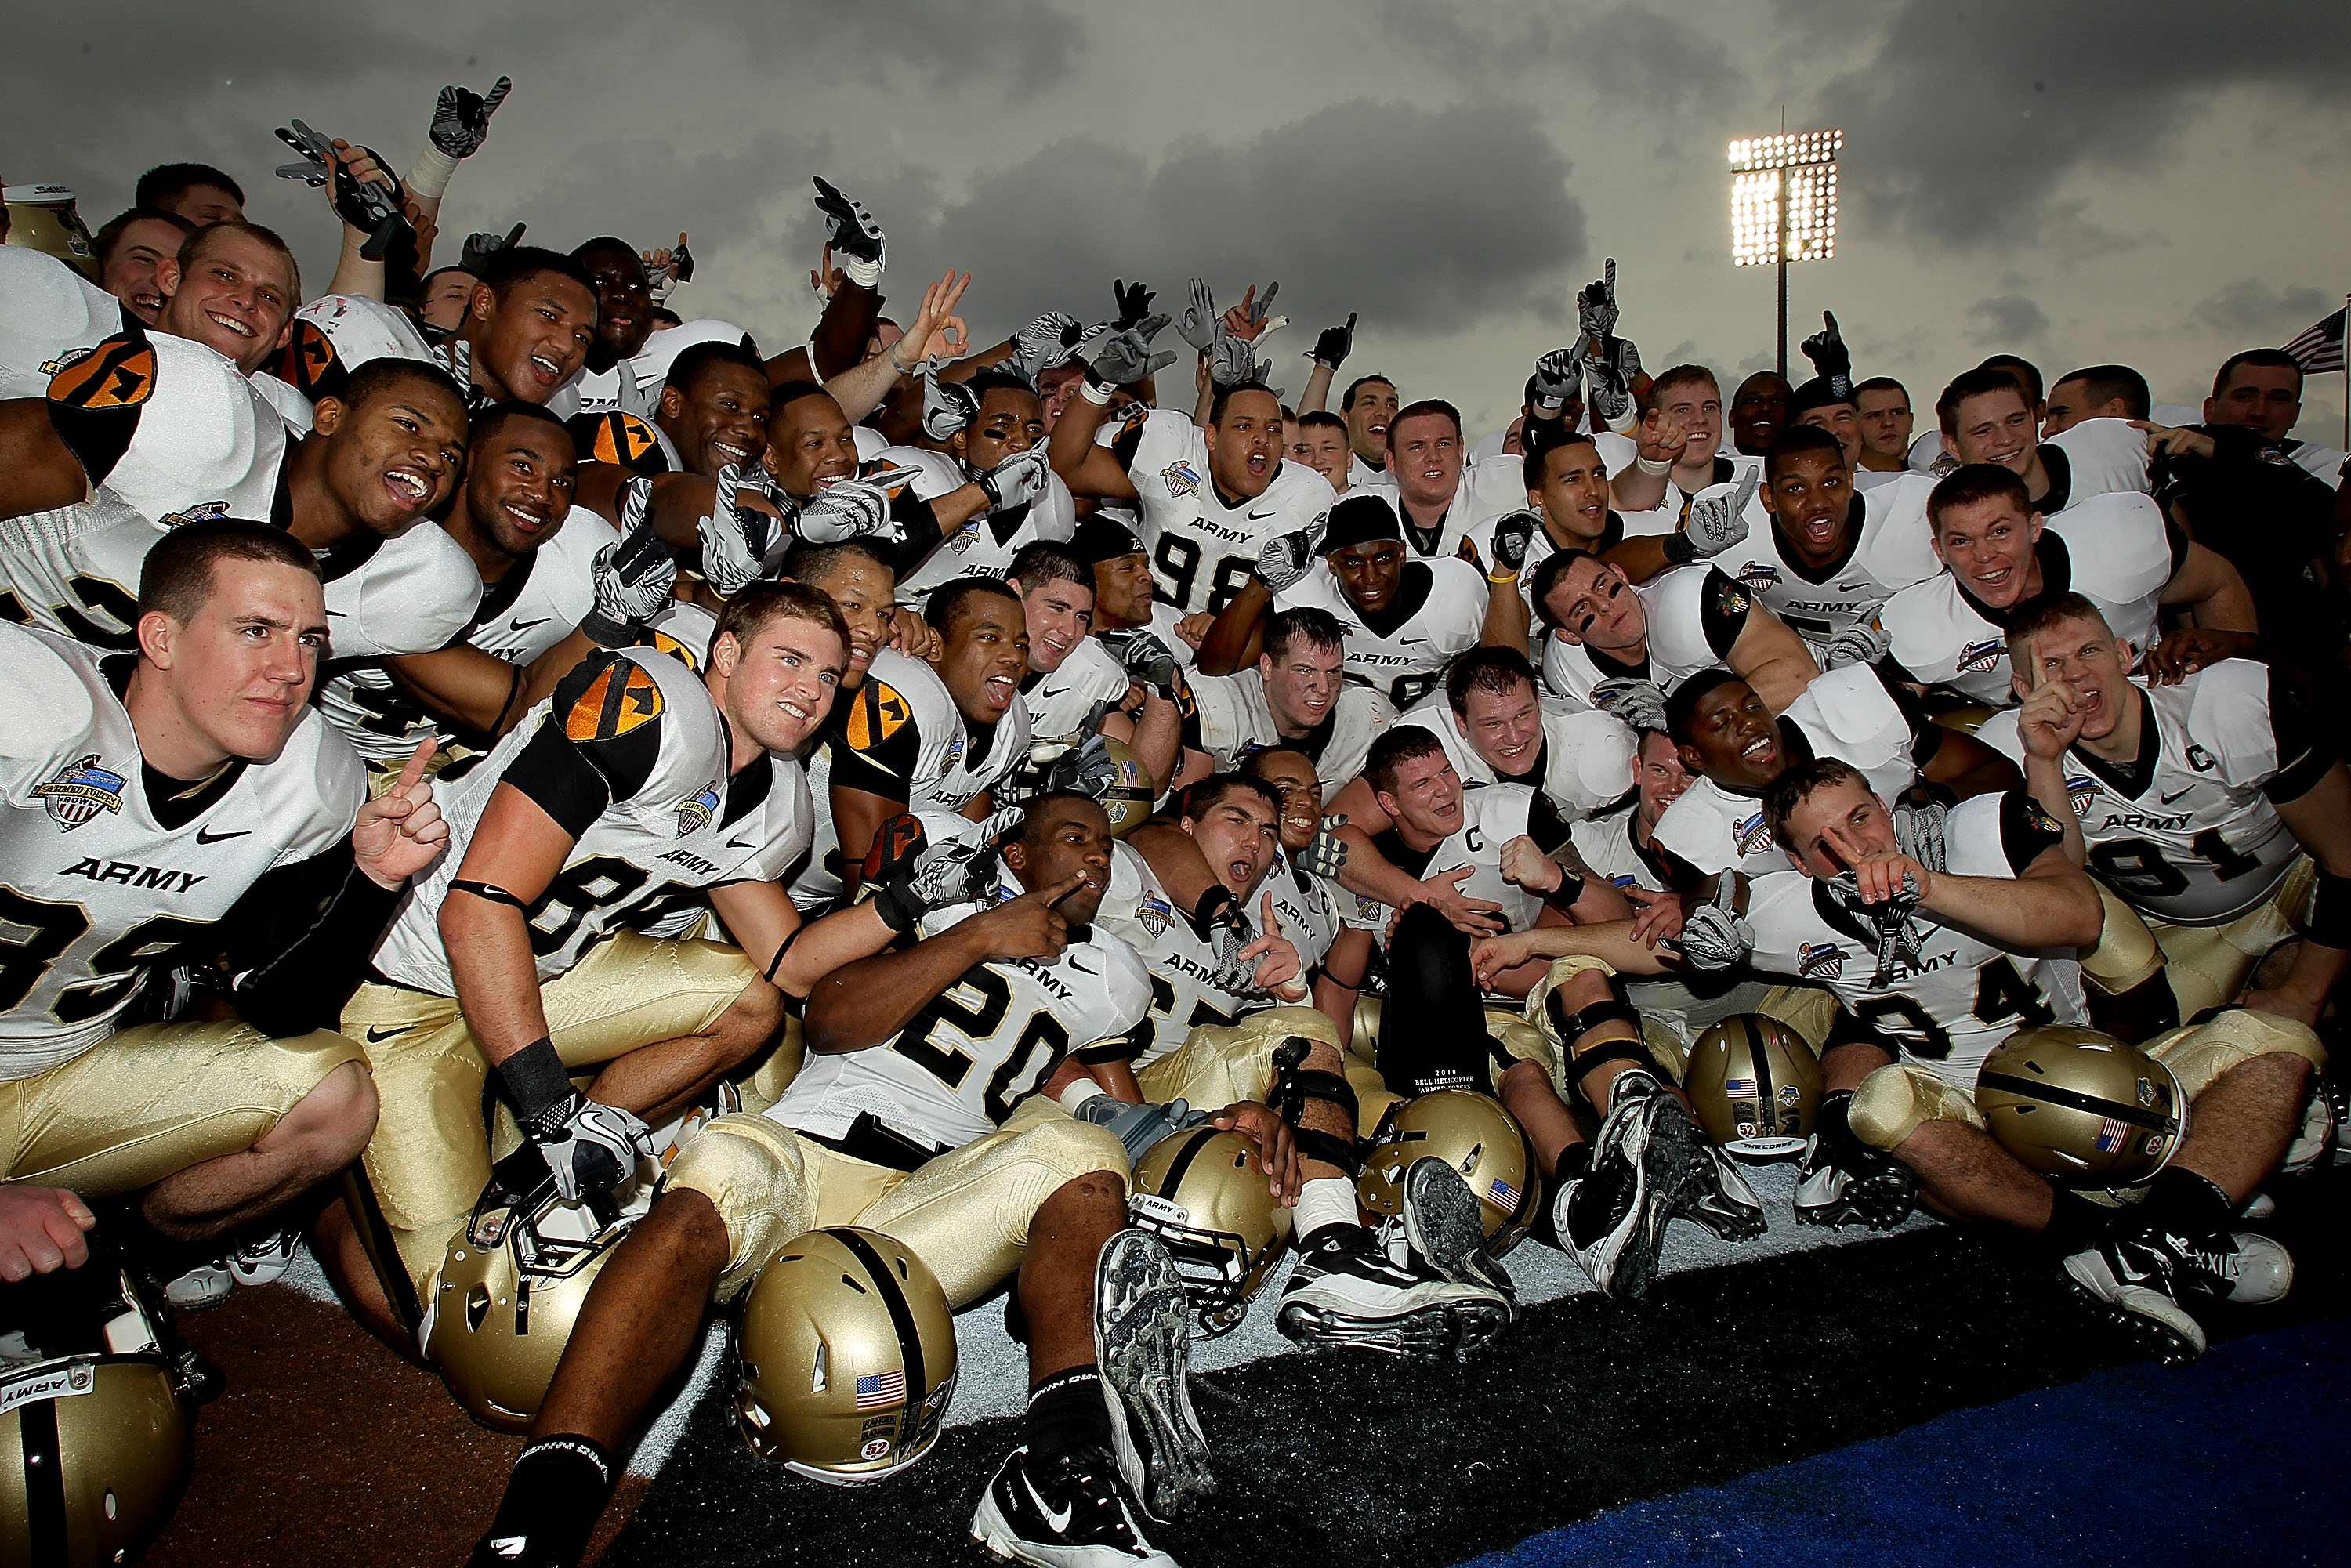 DALLAS, TX - DECEMBER 30:  The Army Black Knights celebrate a 16-14 win against the SMU Mustangs during the Bell Helicopter Armed Forces Bowl at Gerald J. Ford Stadium on December 30, 2010 in Dallas, Texas.  (Photo by Ronald Martinez/Getty Images)